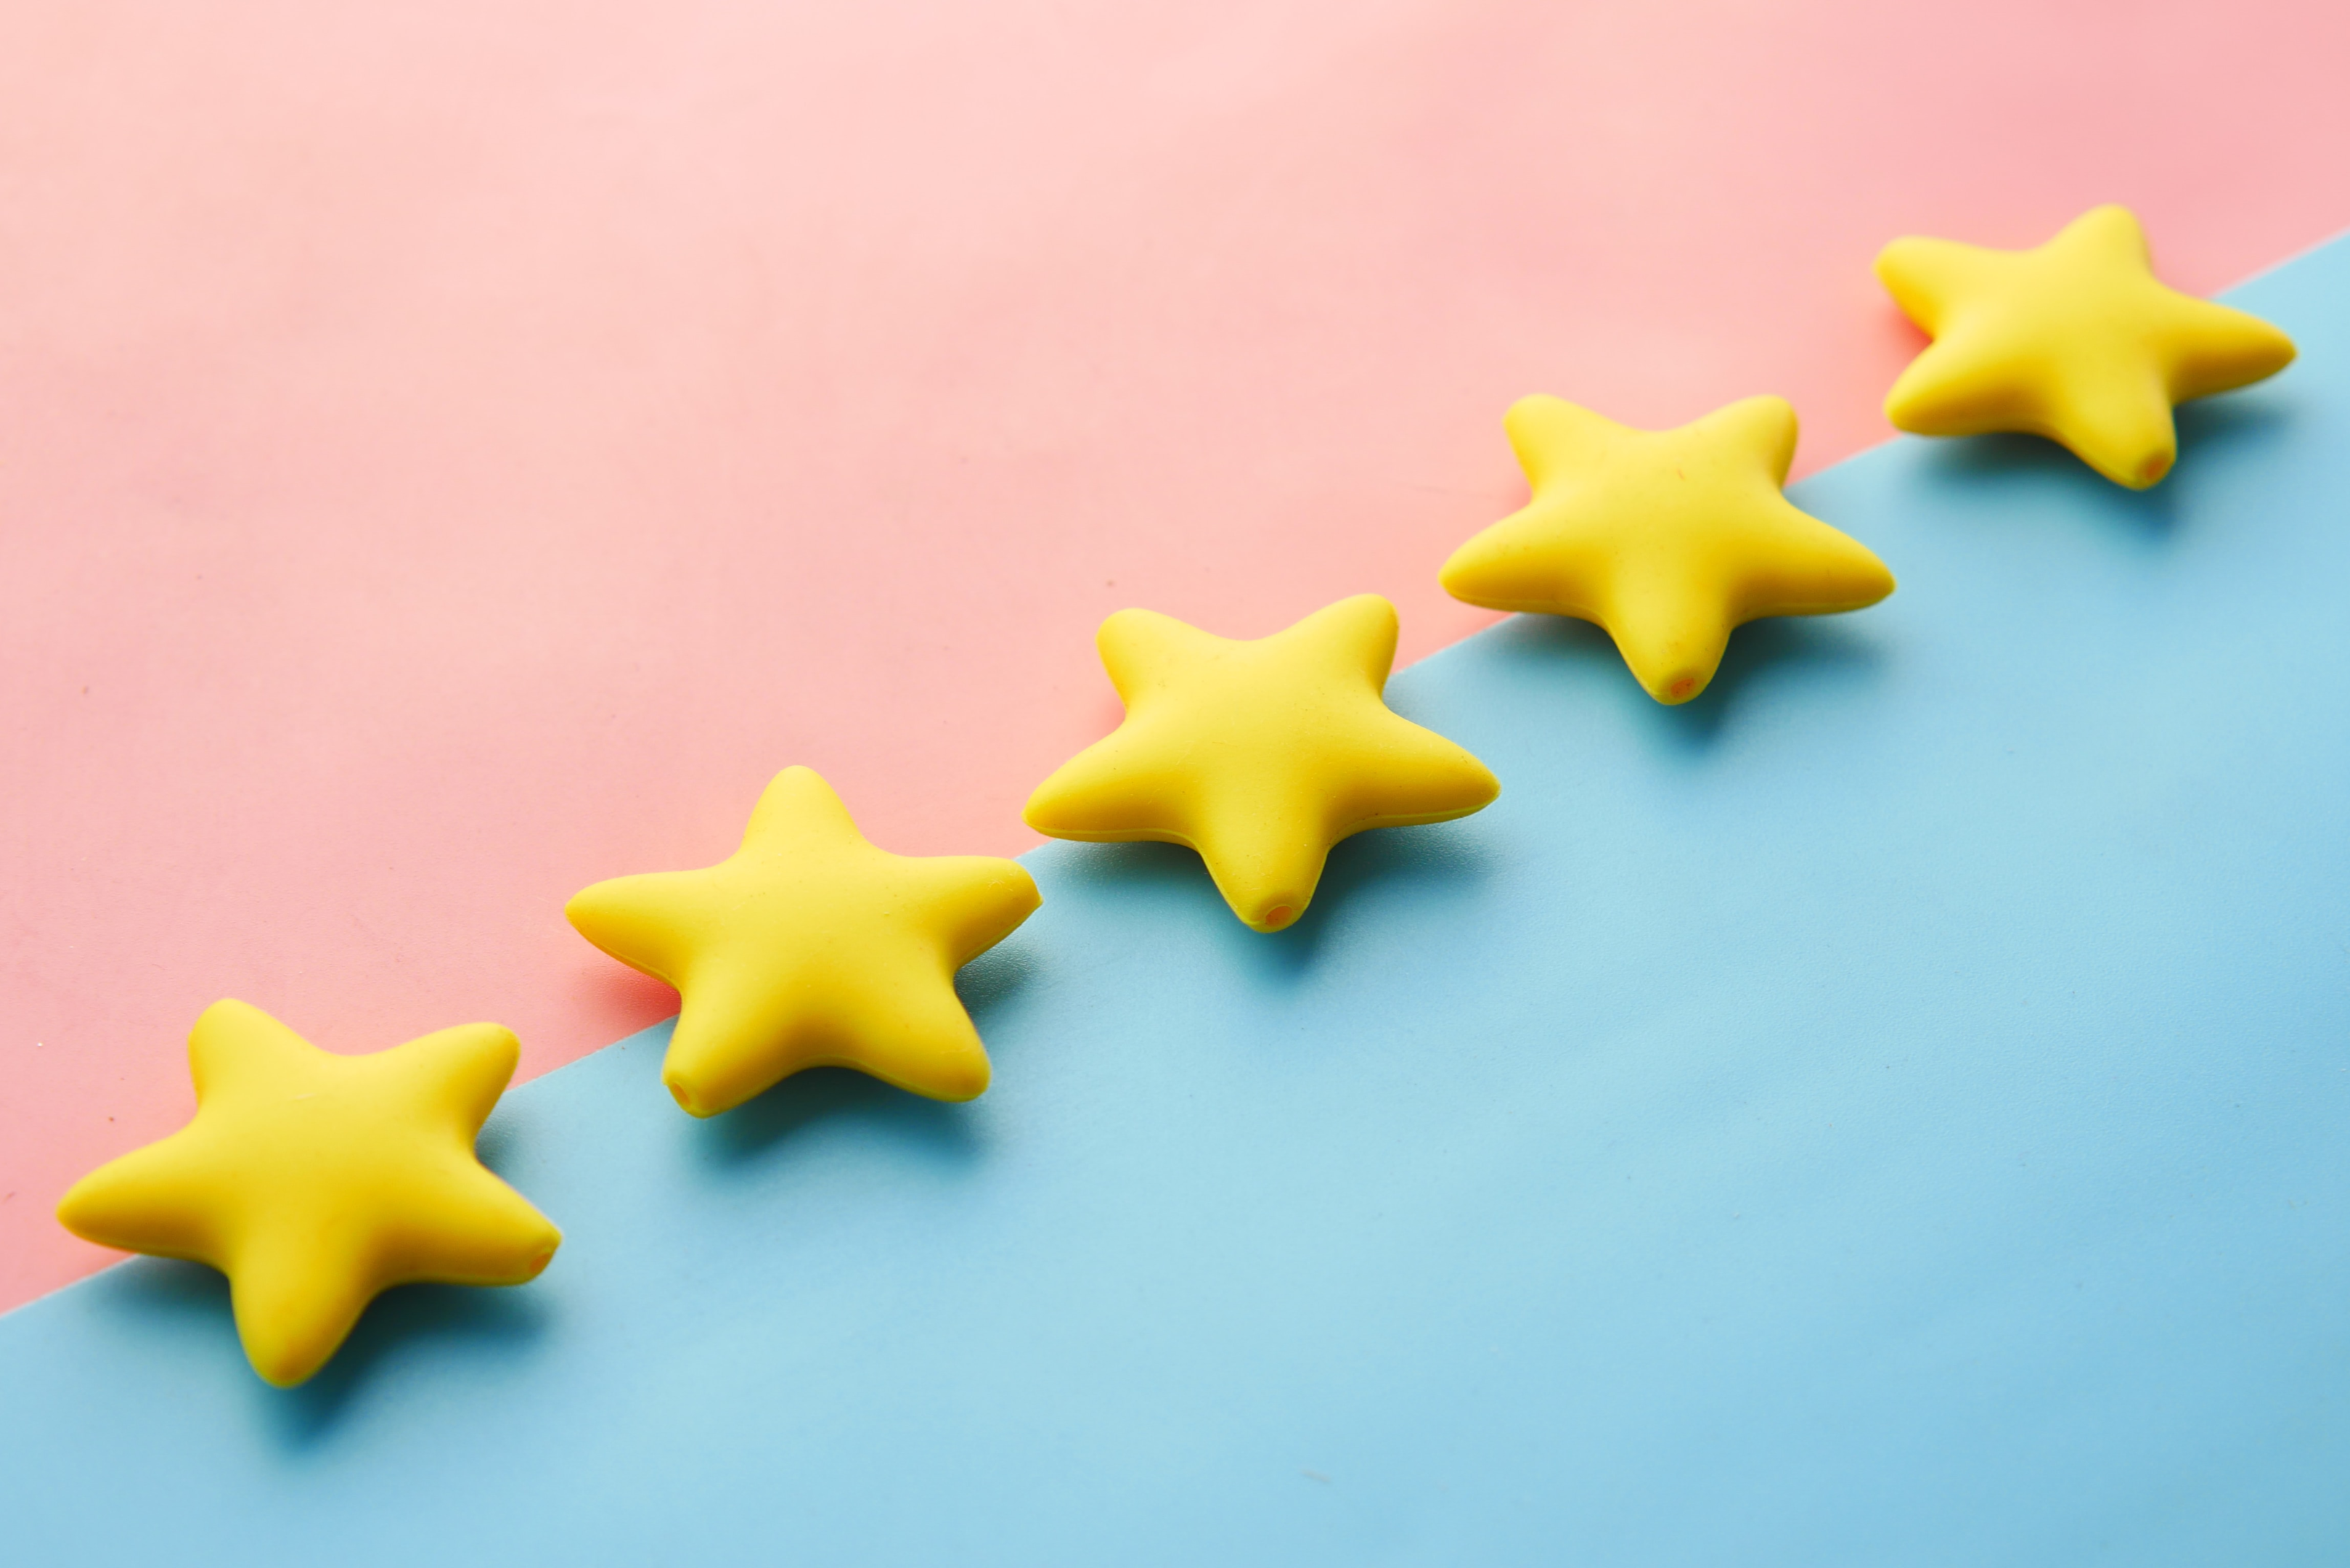 5 Cloth Stars lined up on a pink and blue background